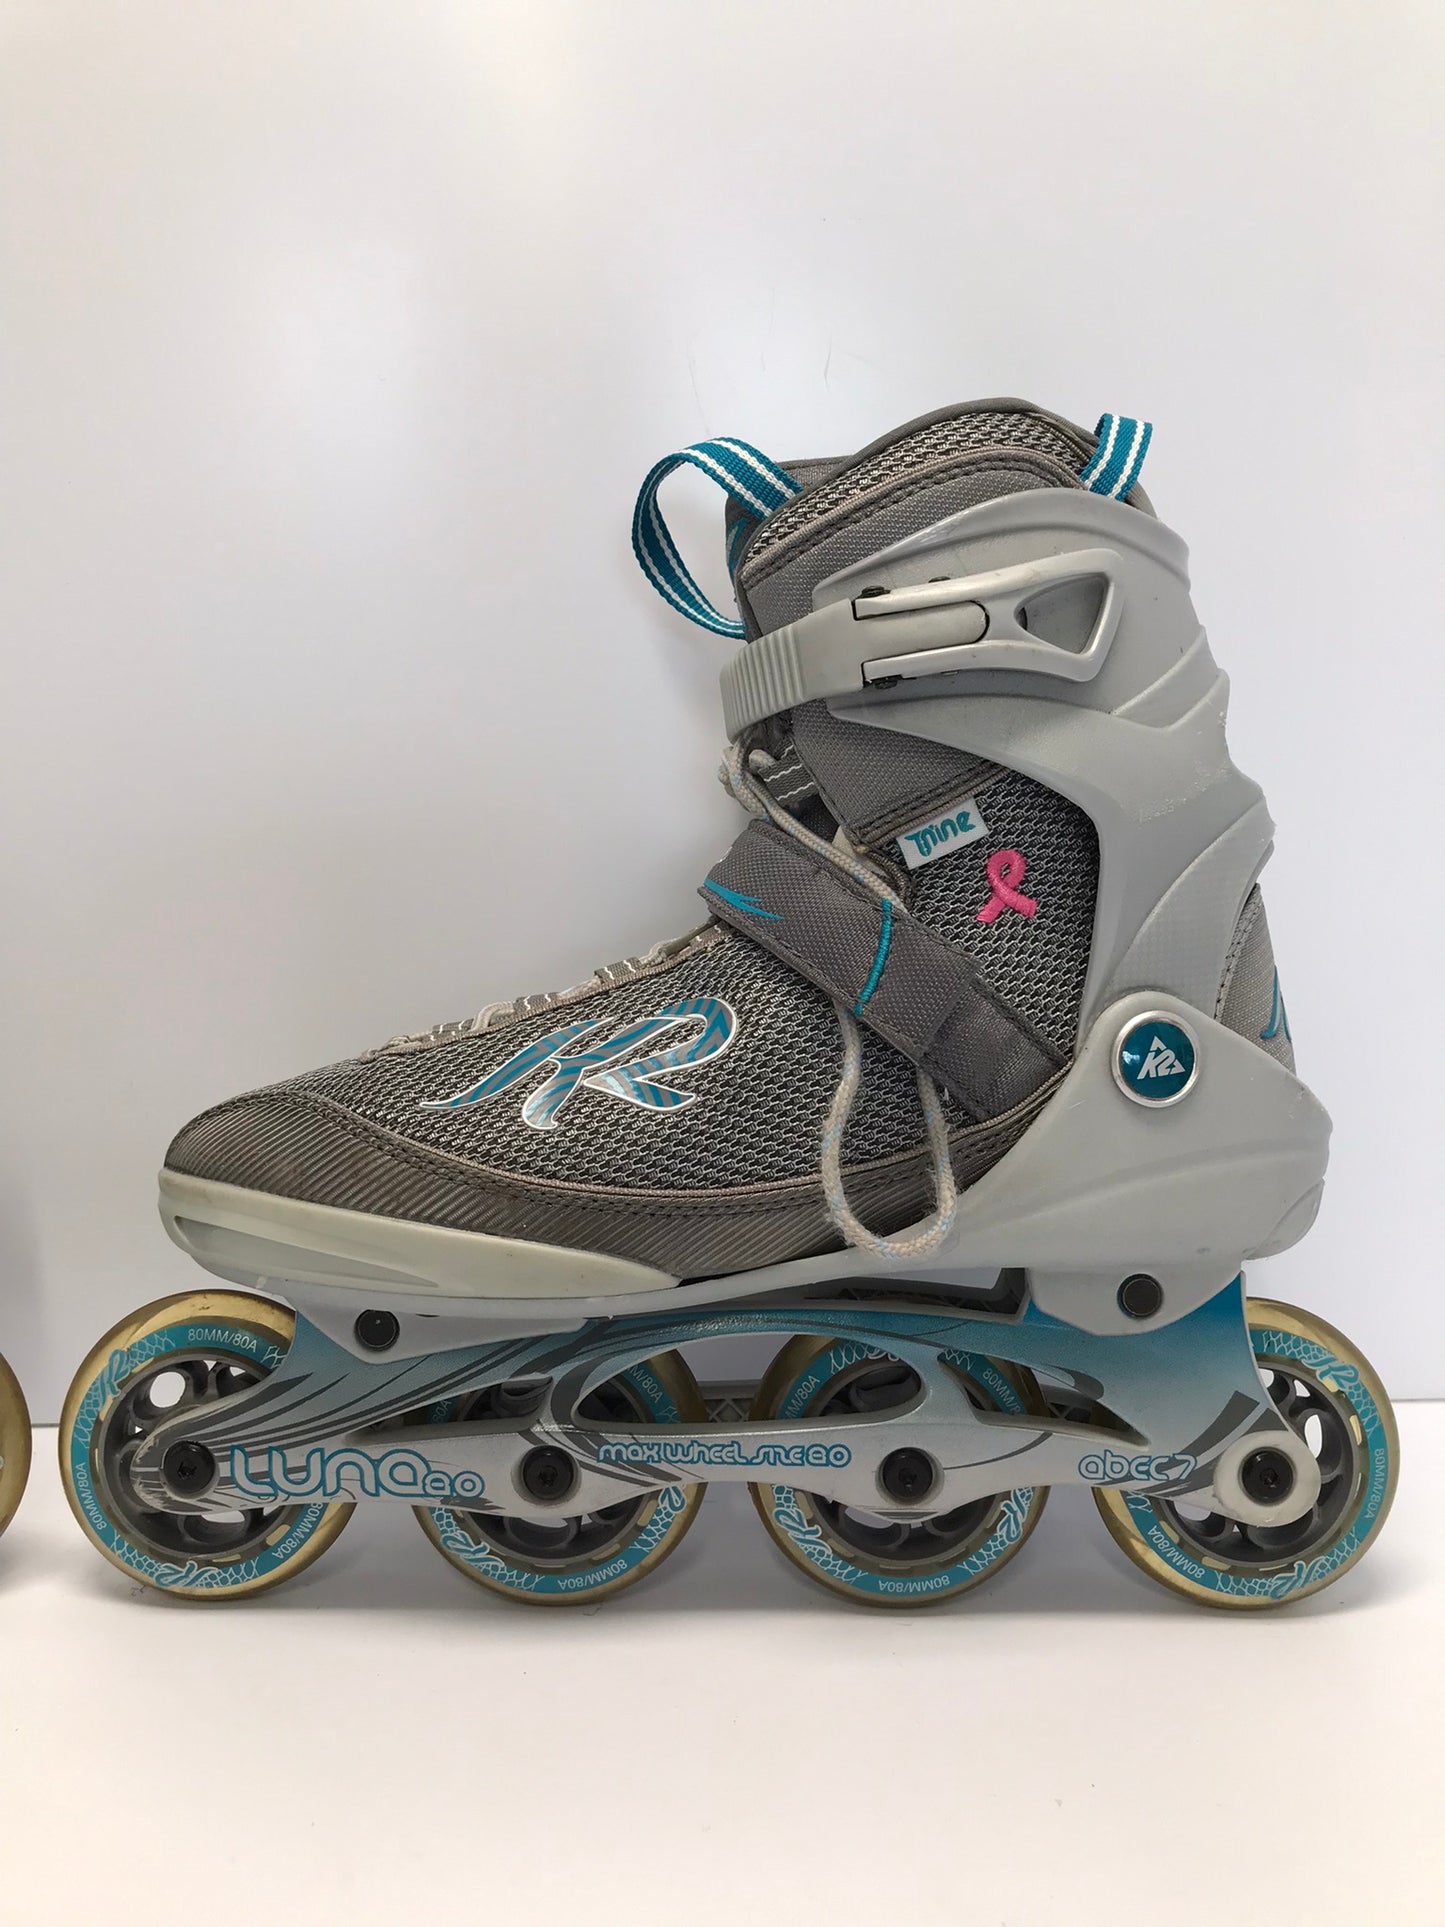 Inline Roller Skates Ladies Size 10 K-2 Grey Teal With Rubber Wheels New Demo Model